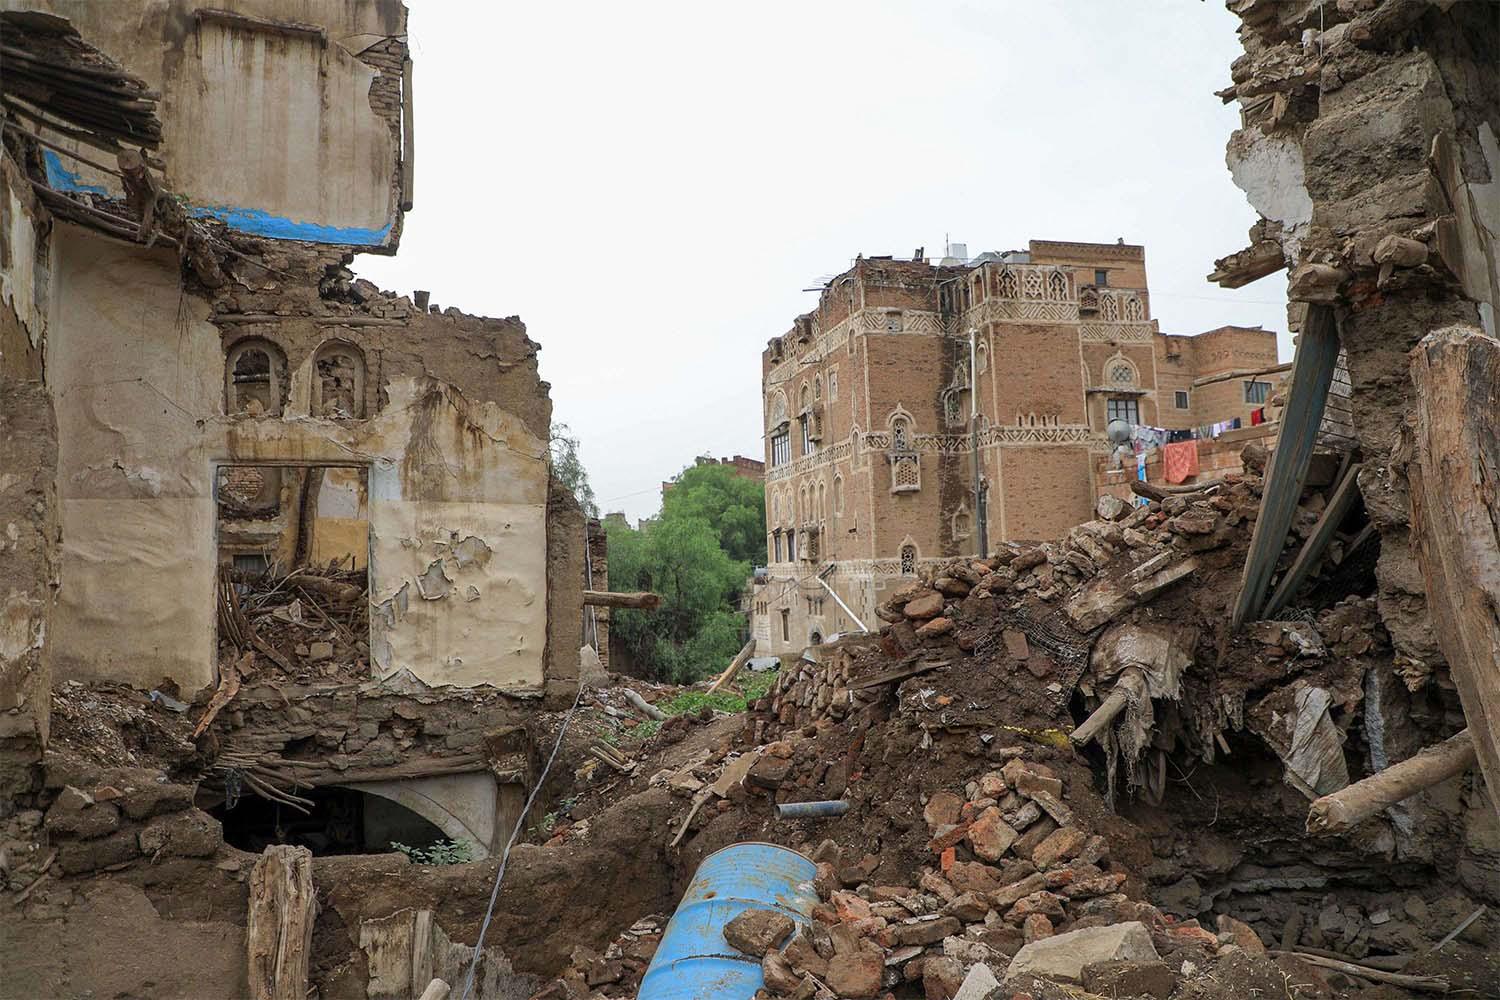 Around 5,000 of the towering buildings in the old city have leaky roofs and 107 have partially collapsed roofs